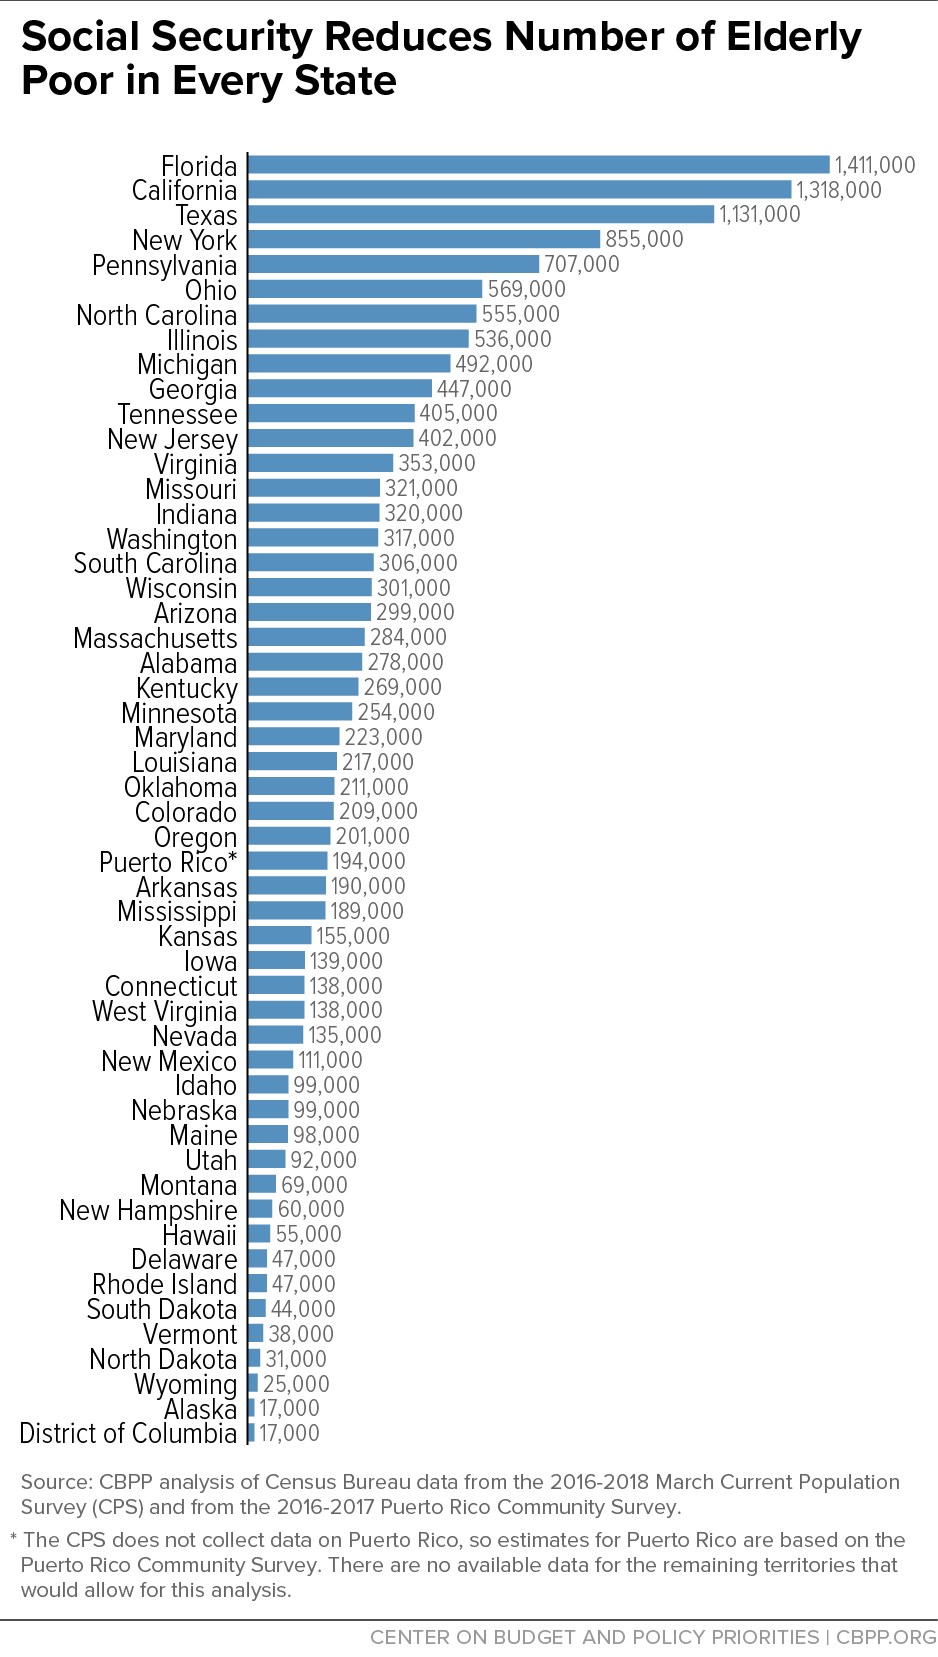 Social Security Reduces Number of Elderly Poor in Every State